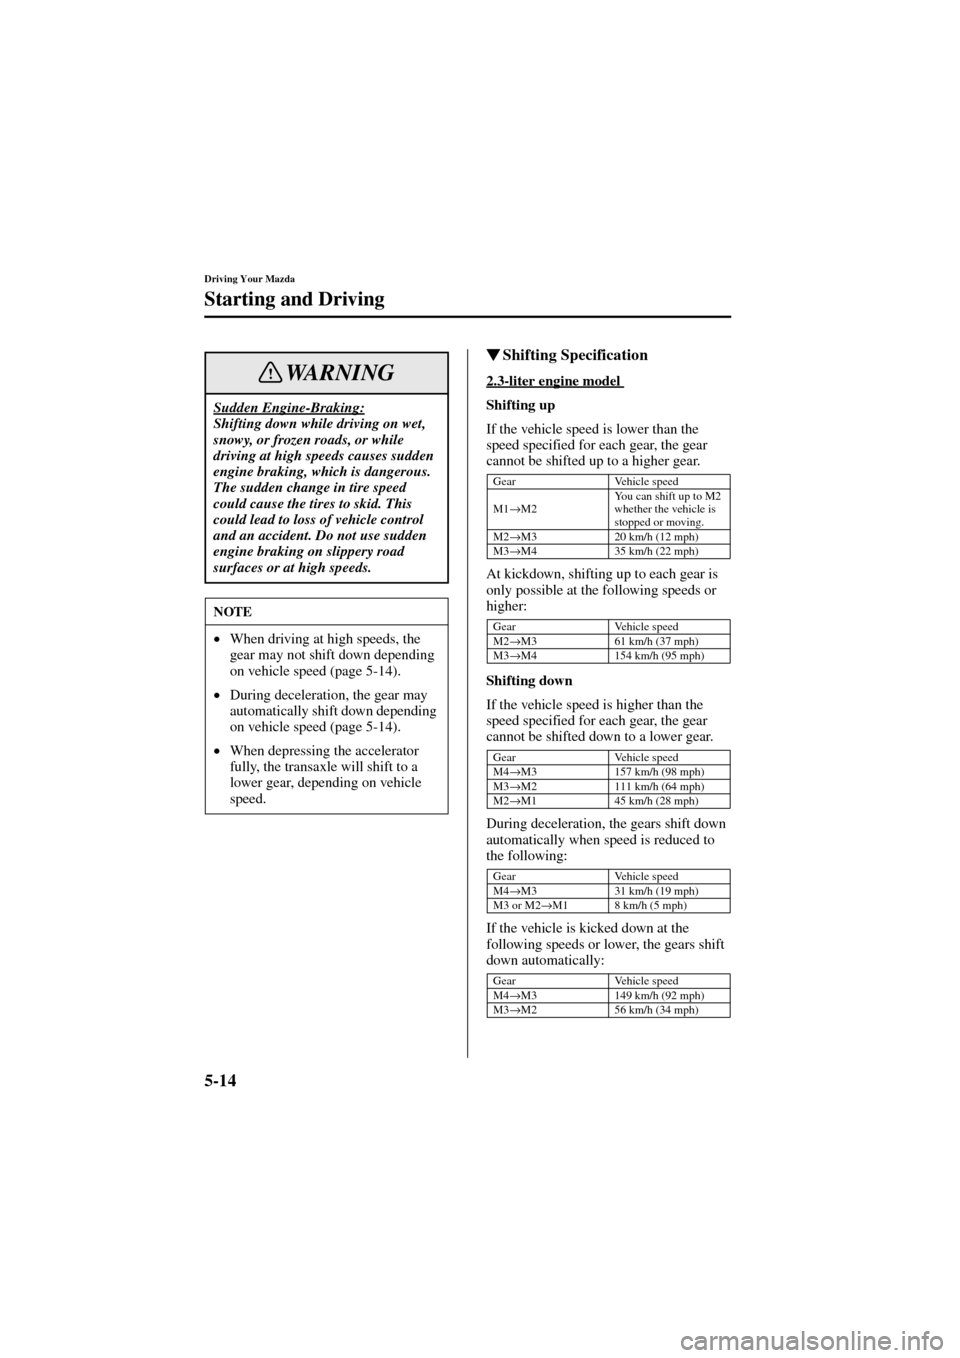 MAZDA MODEL 6 2004  Owners Manual (in English) 5-14
Driving Your Mazda
Starting and Driving
Form No. 8R29-EA-02I
Shifting Specification
2.3-liter engine model 
Shifting up
If the vehicle speed is lower than the 
speed specified for each gear, the